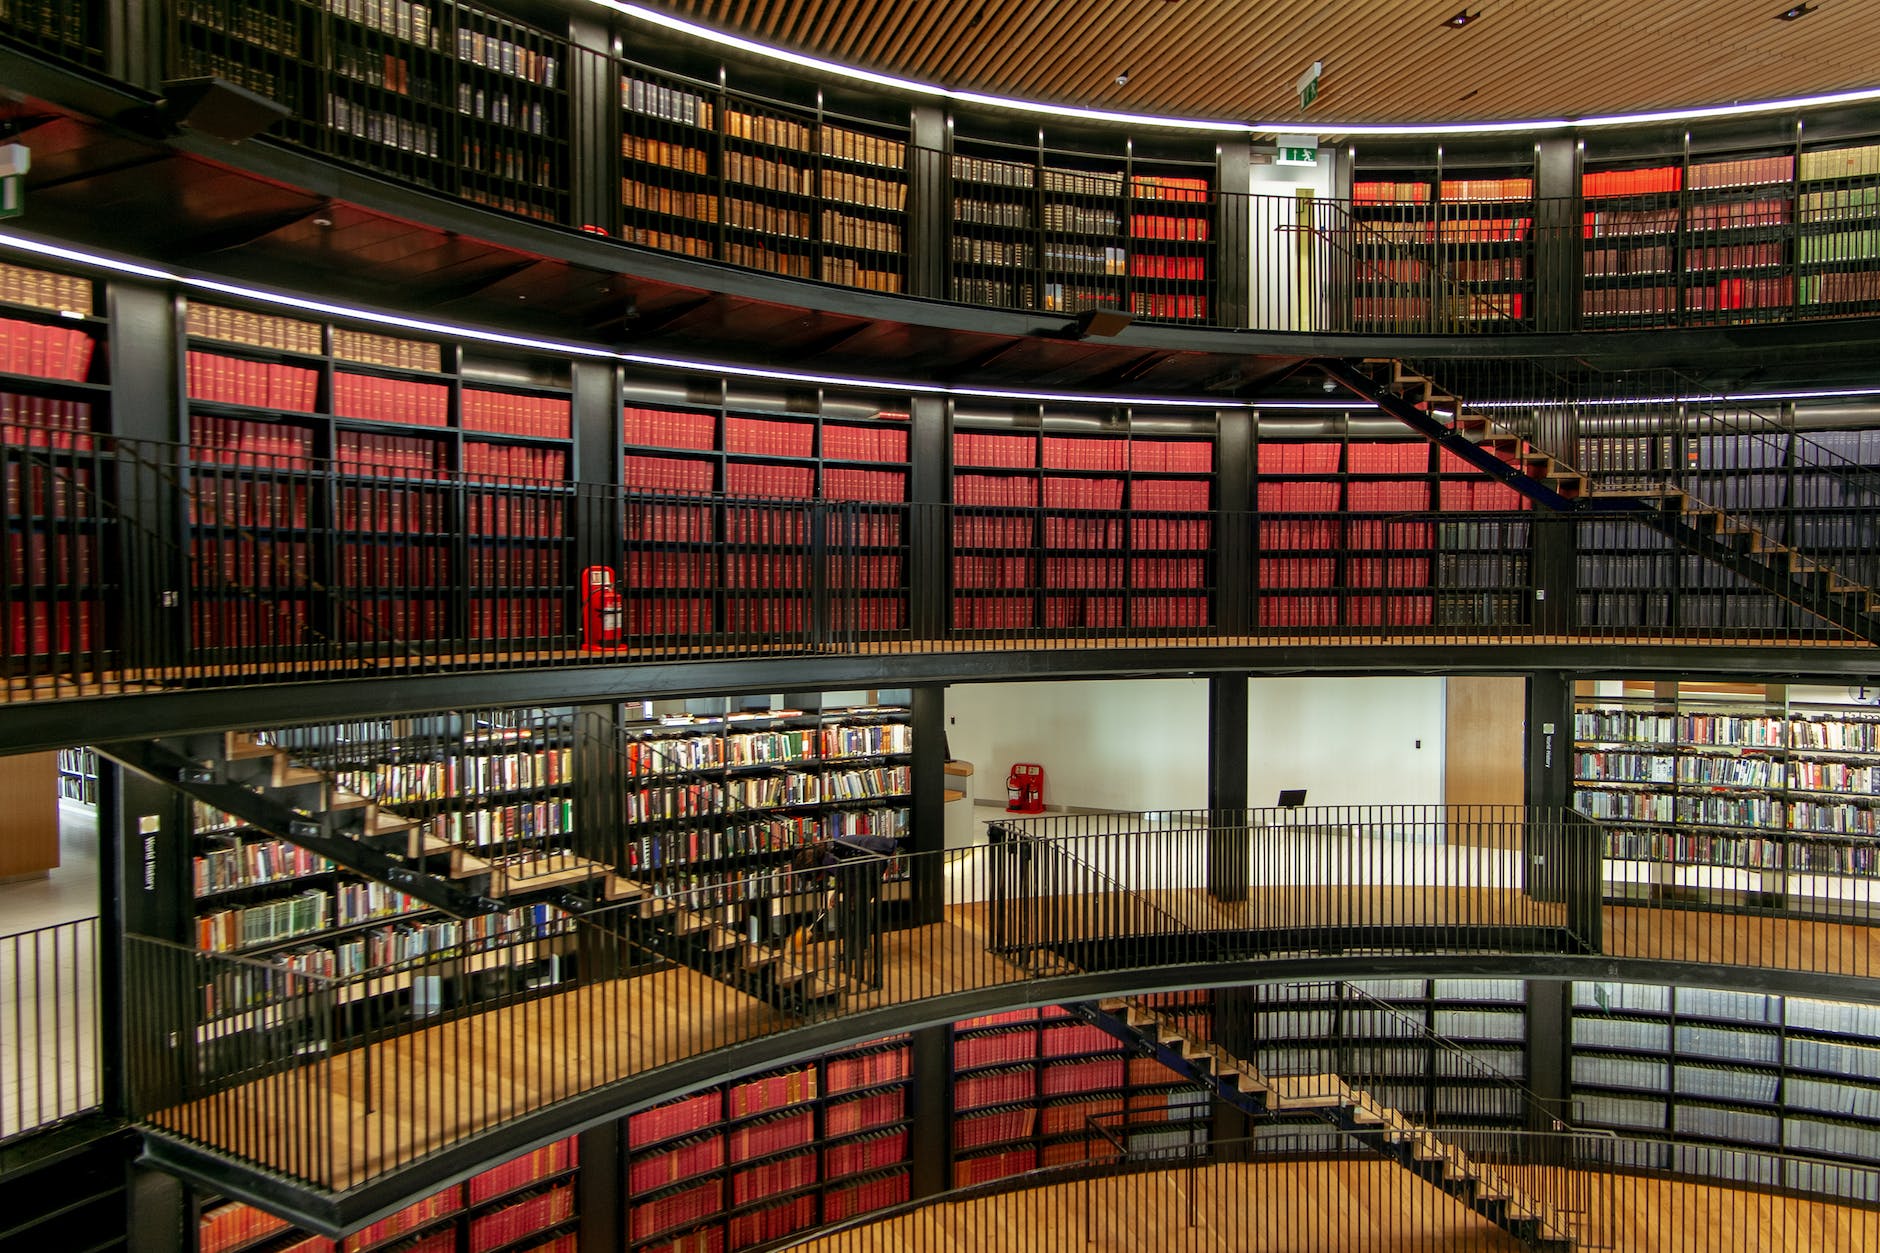 interior of library with bookshelves